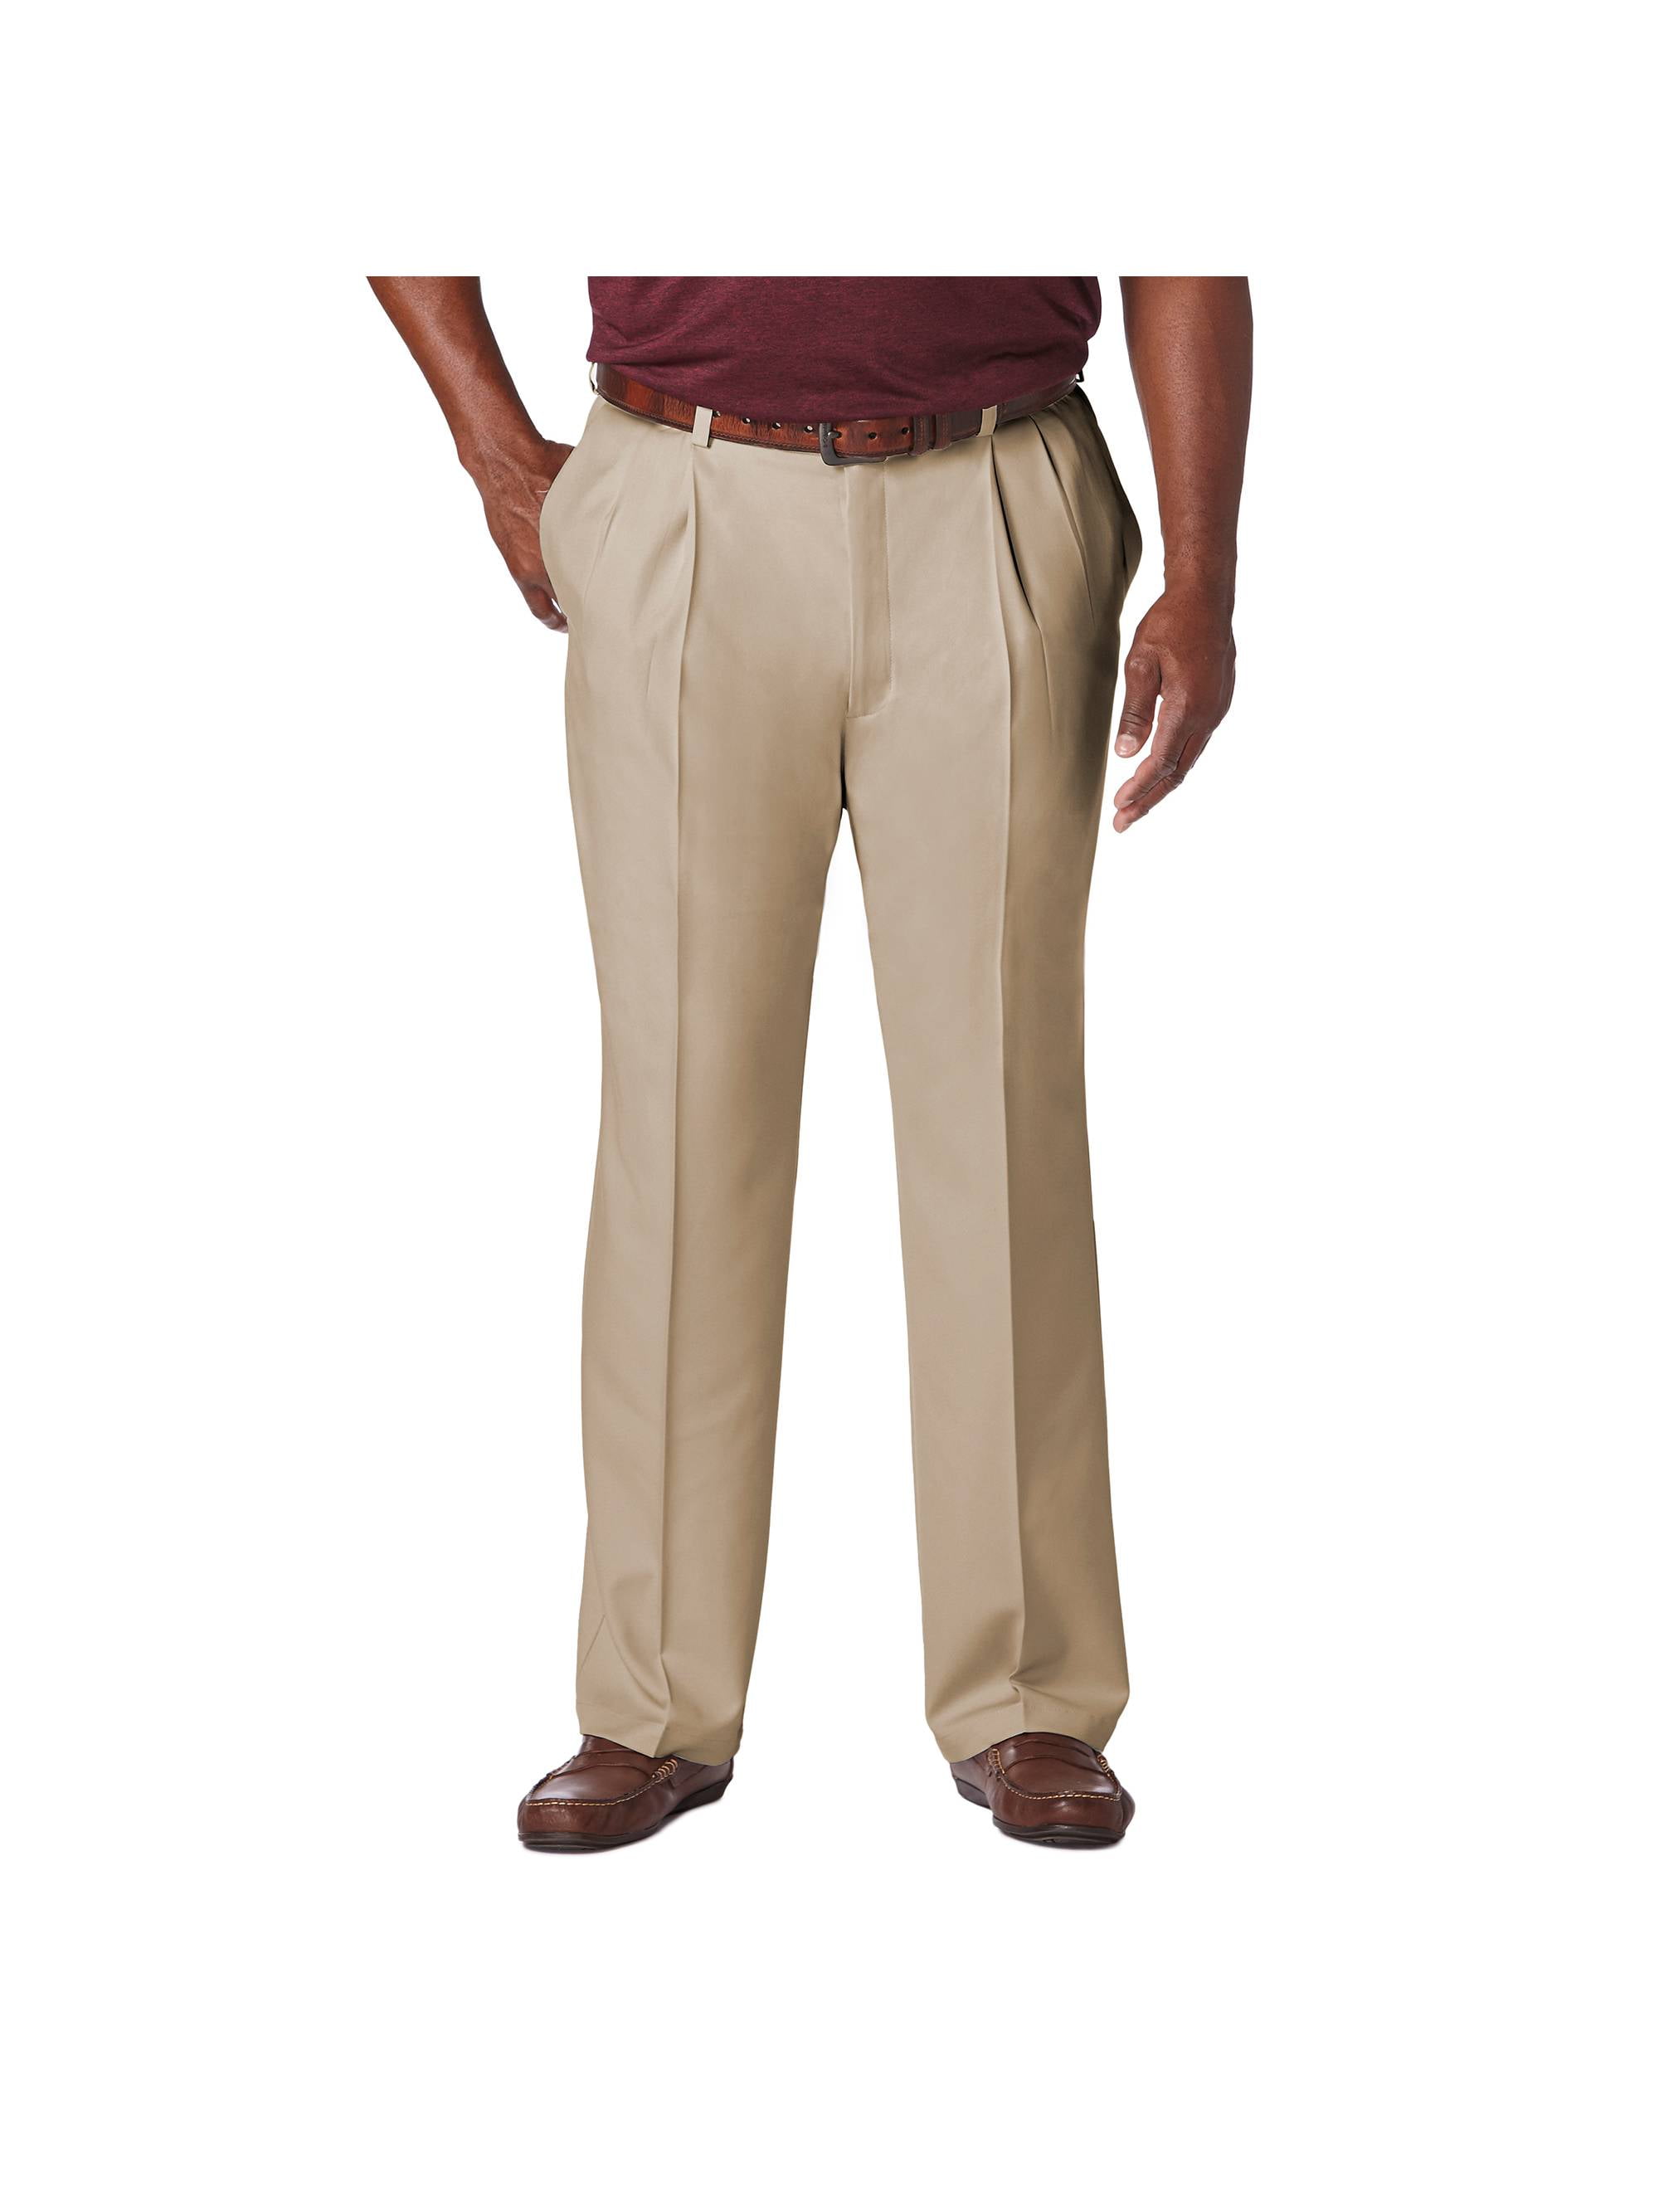 Haggar Mens Big and Tall Cool 18 Pro Classic Fit Pleat Front Pant